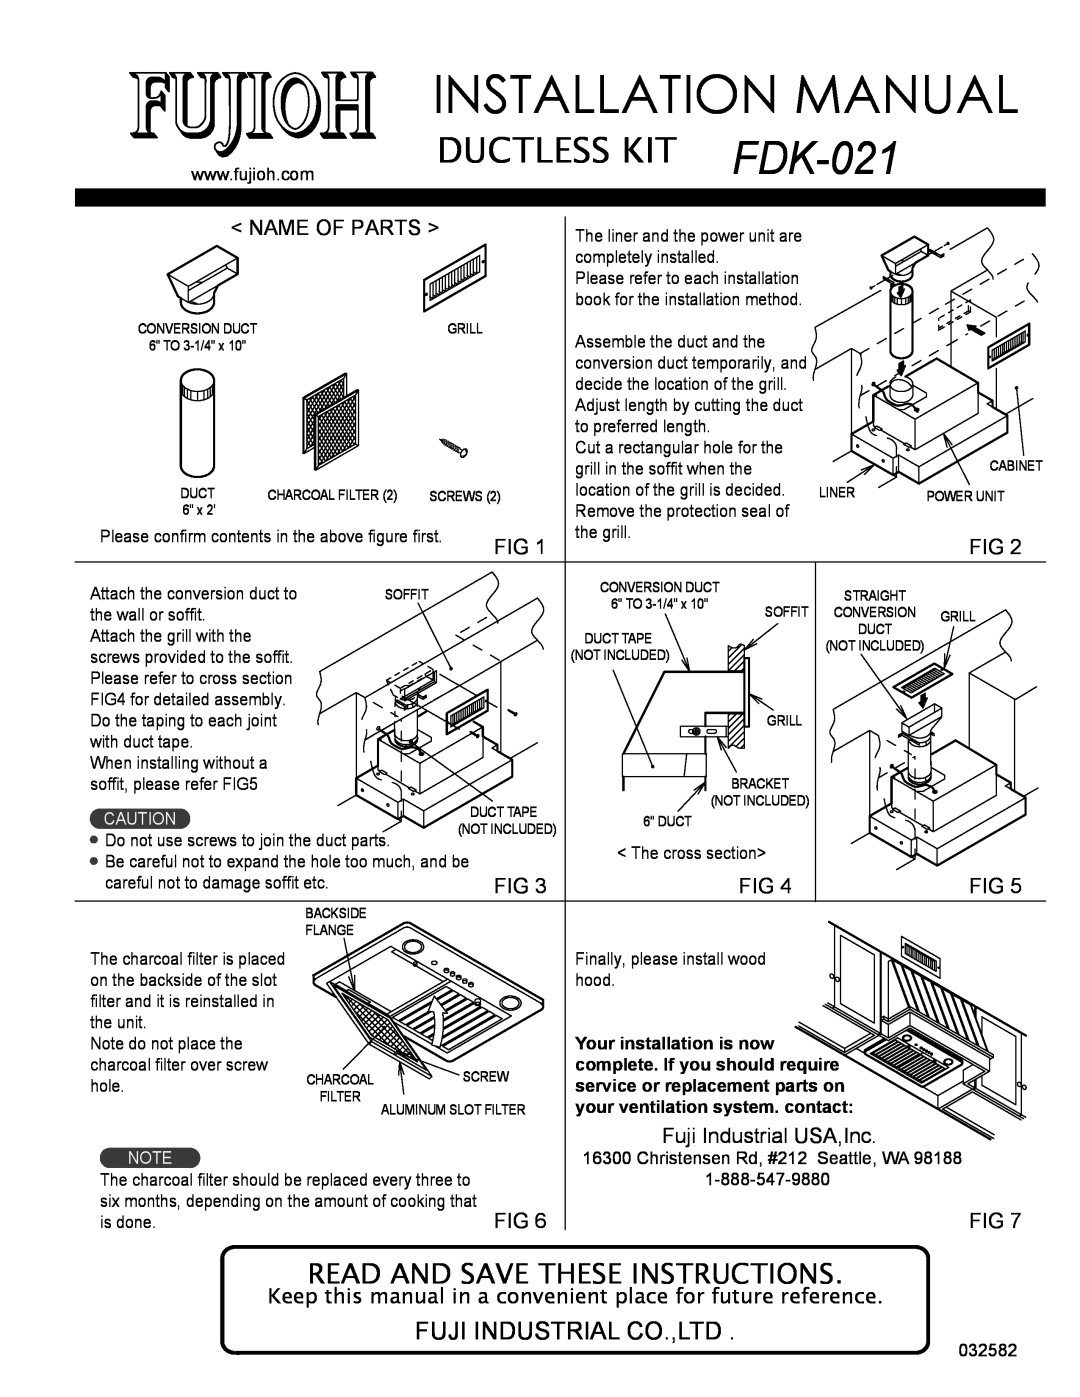 Fujioh FDK-021 installation manual Installation Manual, Ductless Kit, Read And Save These Instructions, Name Of Parts 